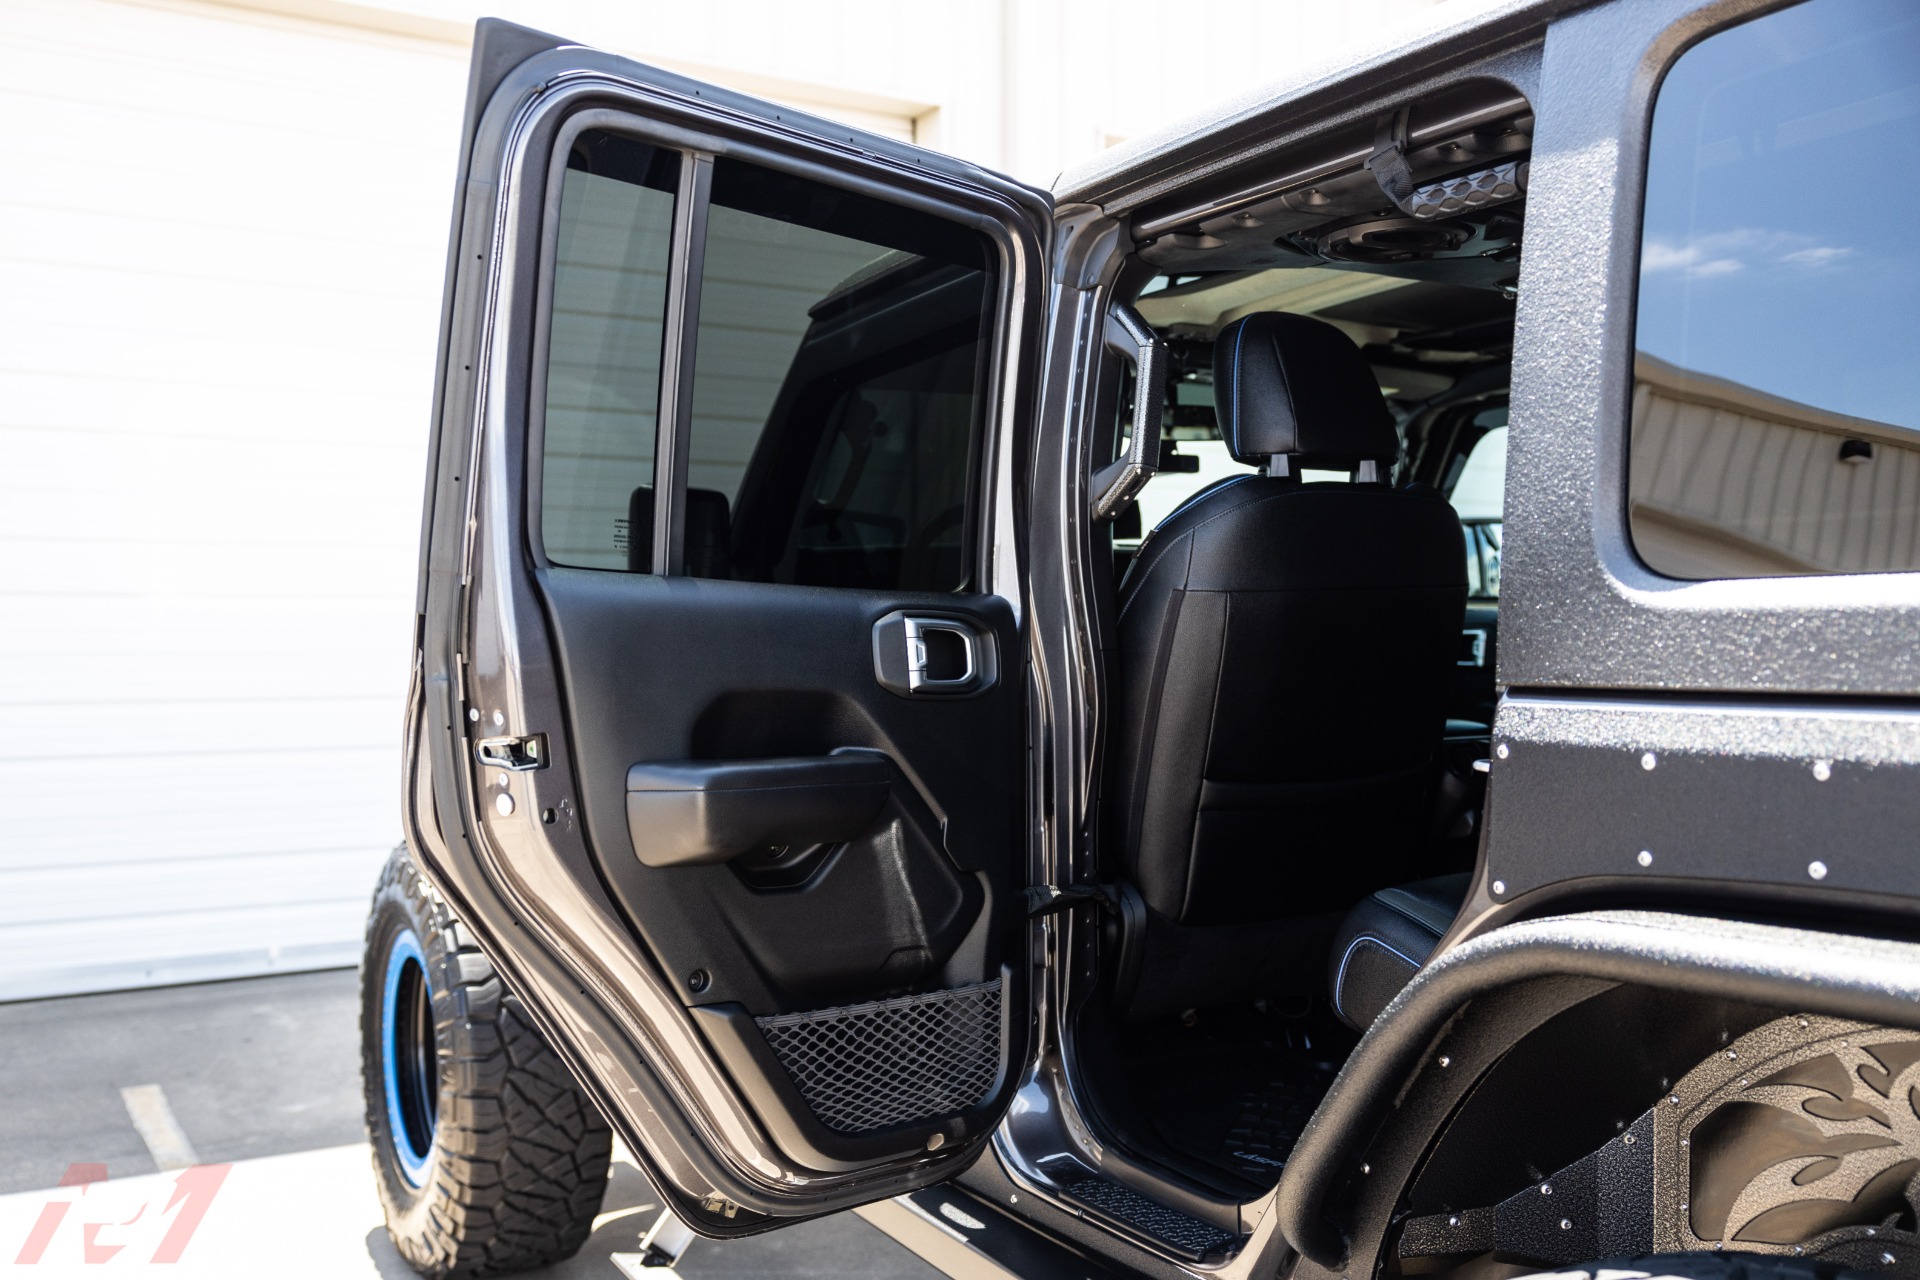 Used-2018-Jeep-Wrangler-Unlimited-JL-Bruiser-Conversions-LS3